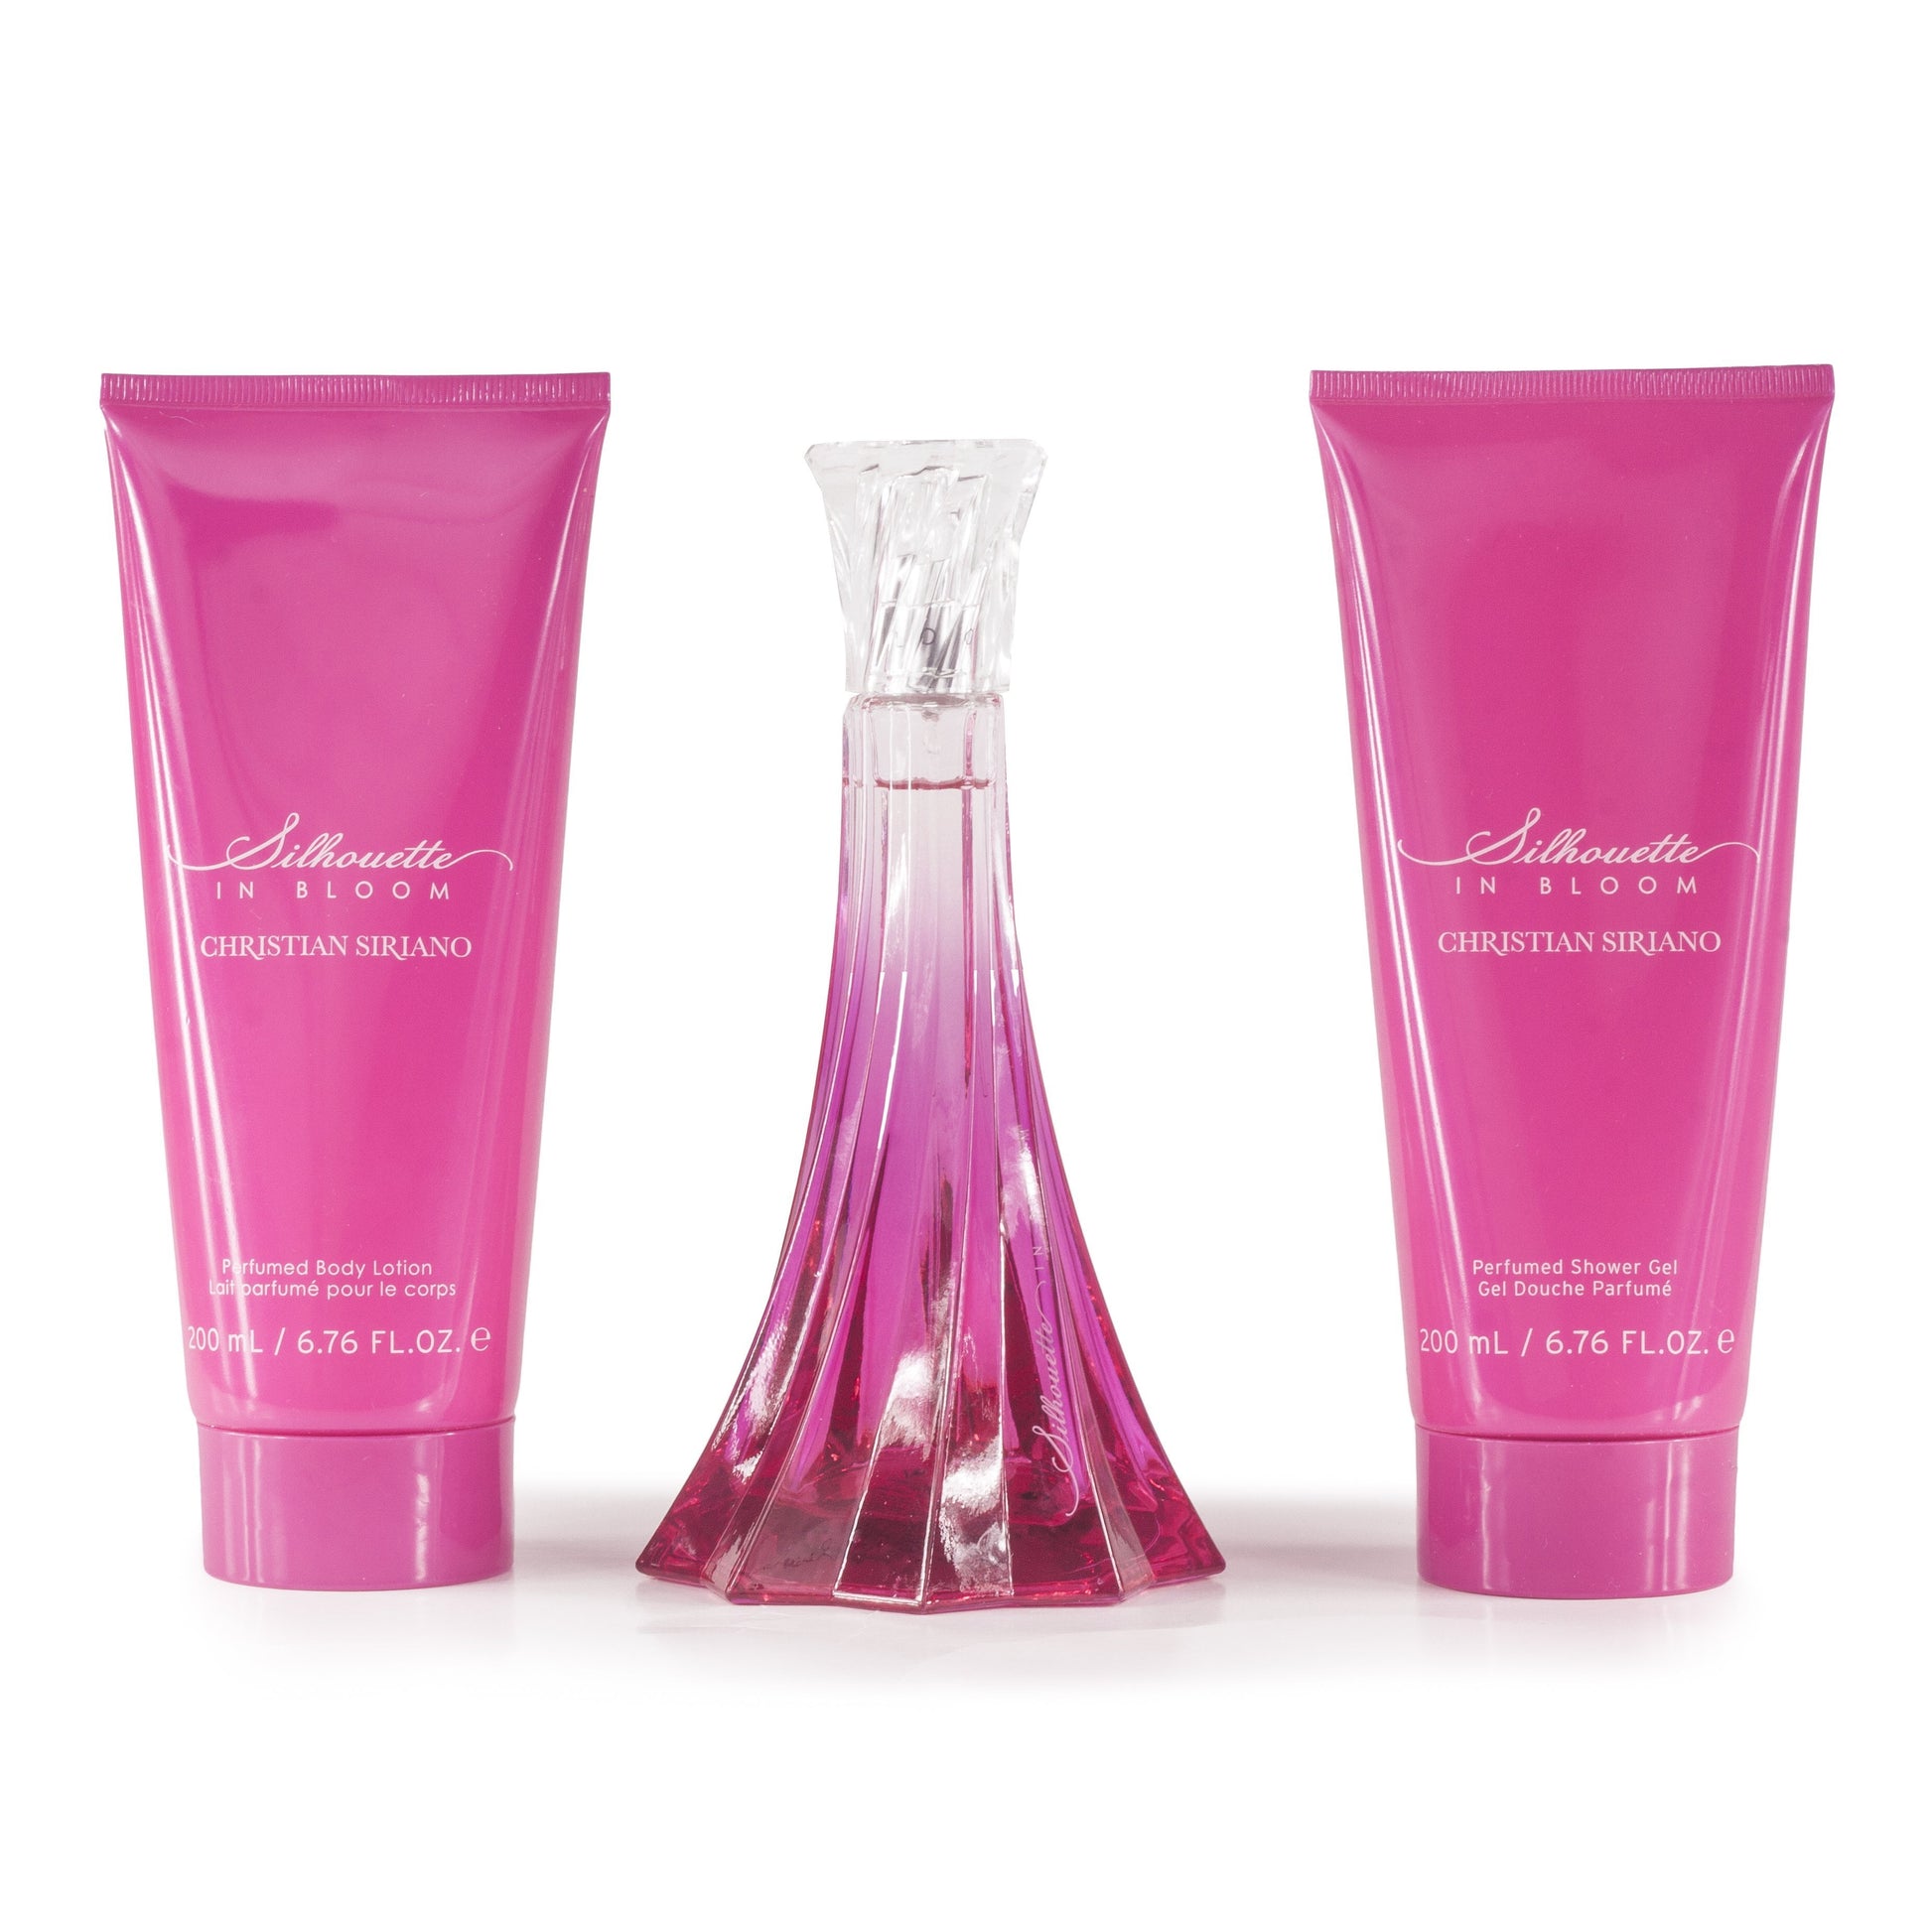 Silhouette in Bloom Gift Set for Women by Christian Siriano, Product image 2